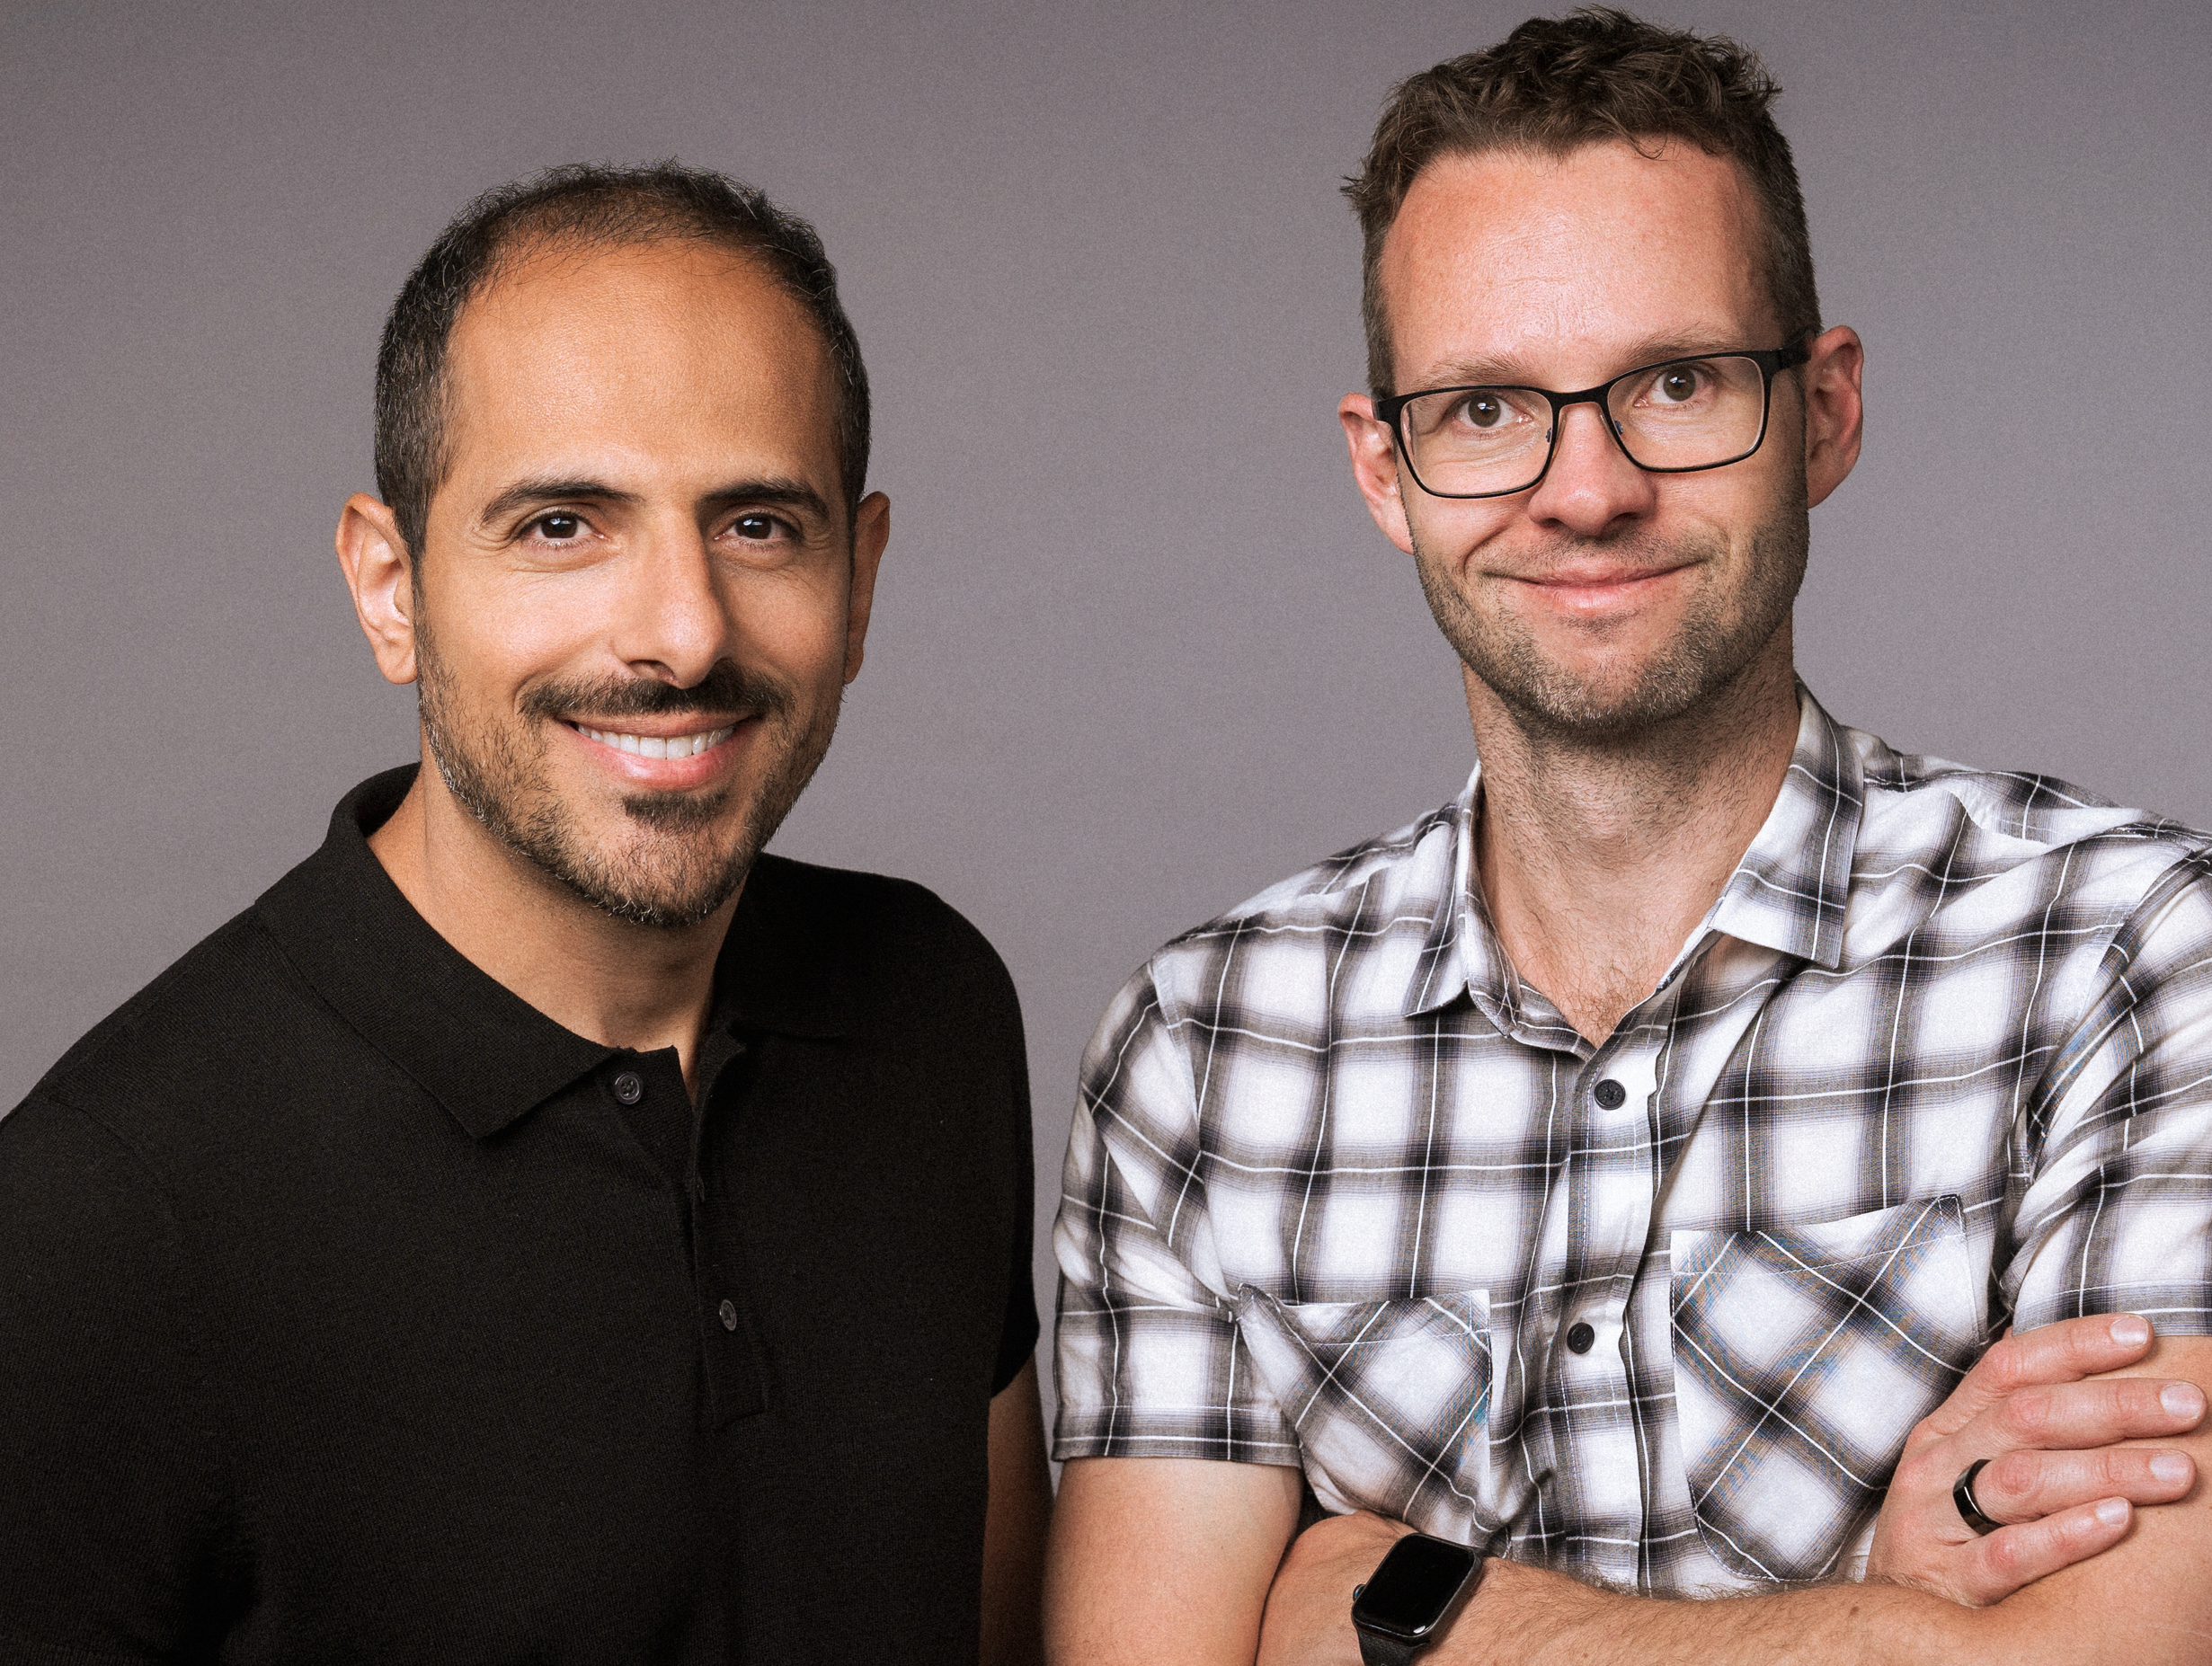 Resource co-founders Aladdin Almubayed and Travis McPeak